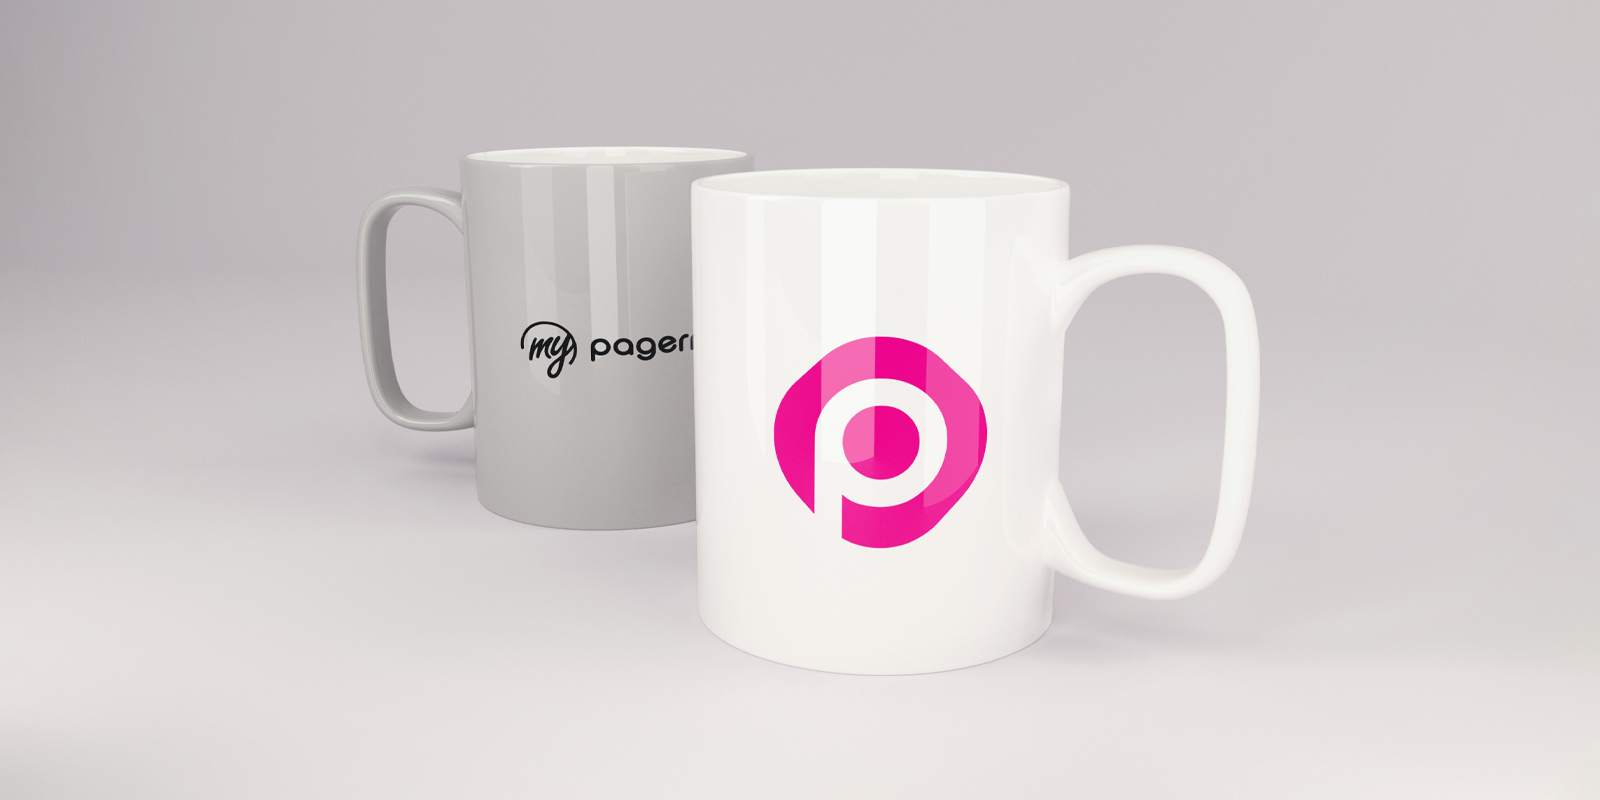 Mugs in Madrid - Print with Pagerr